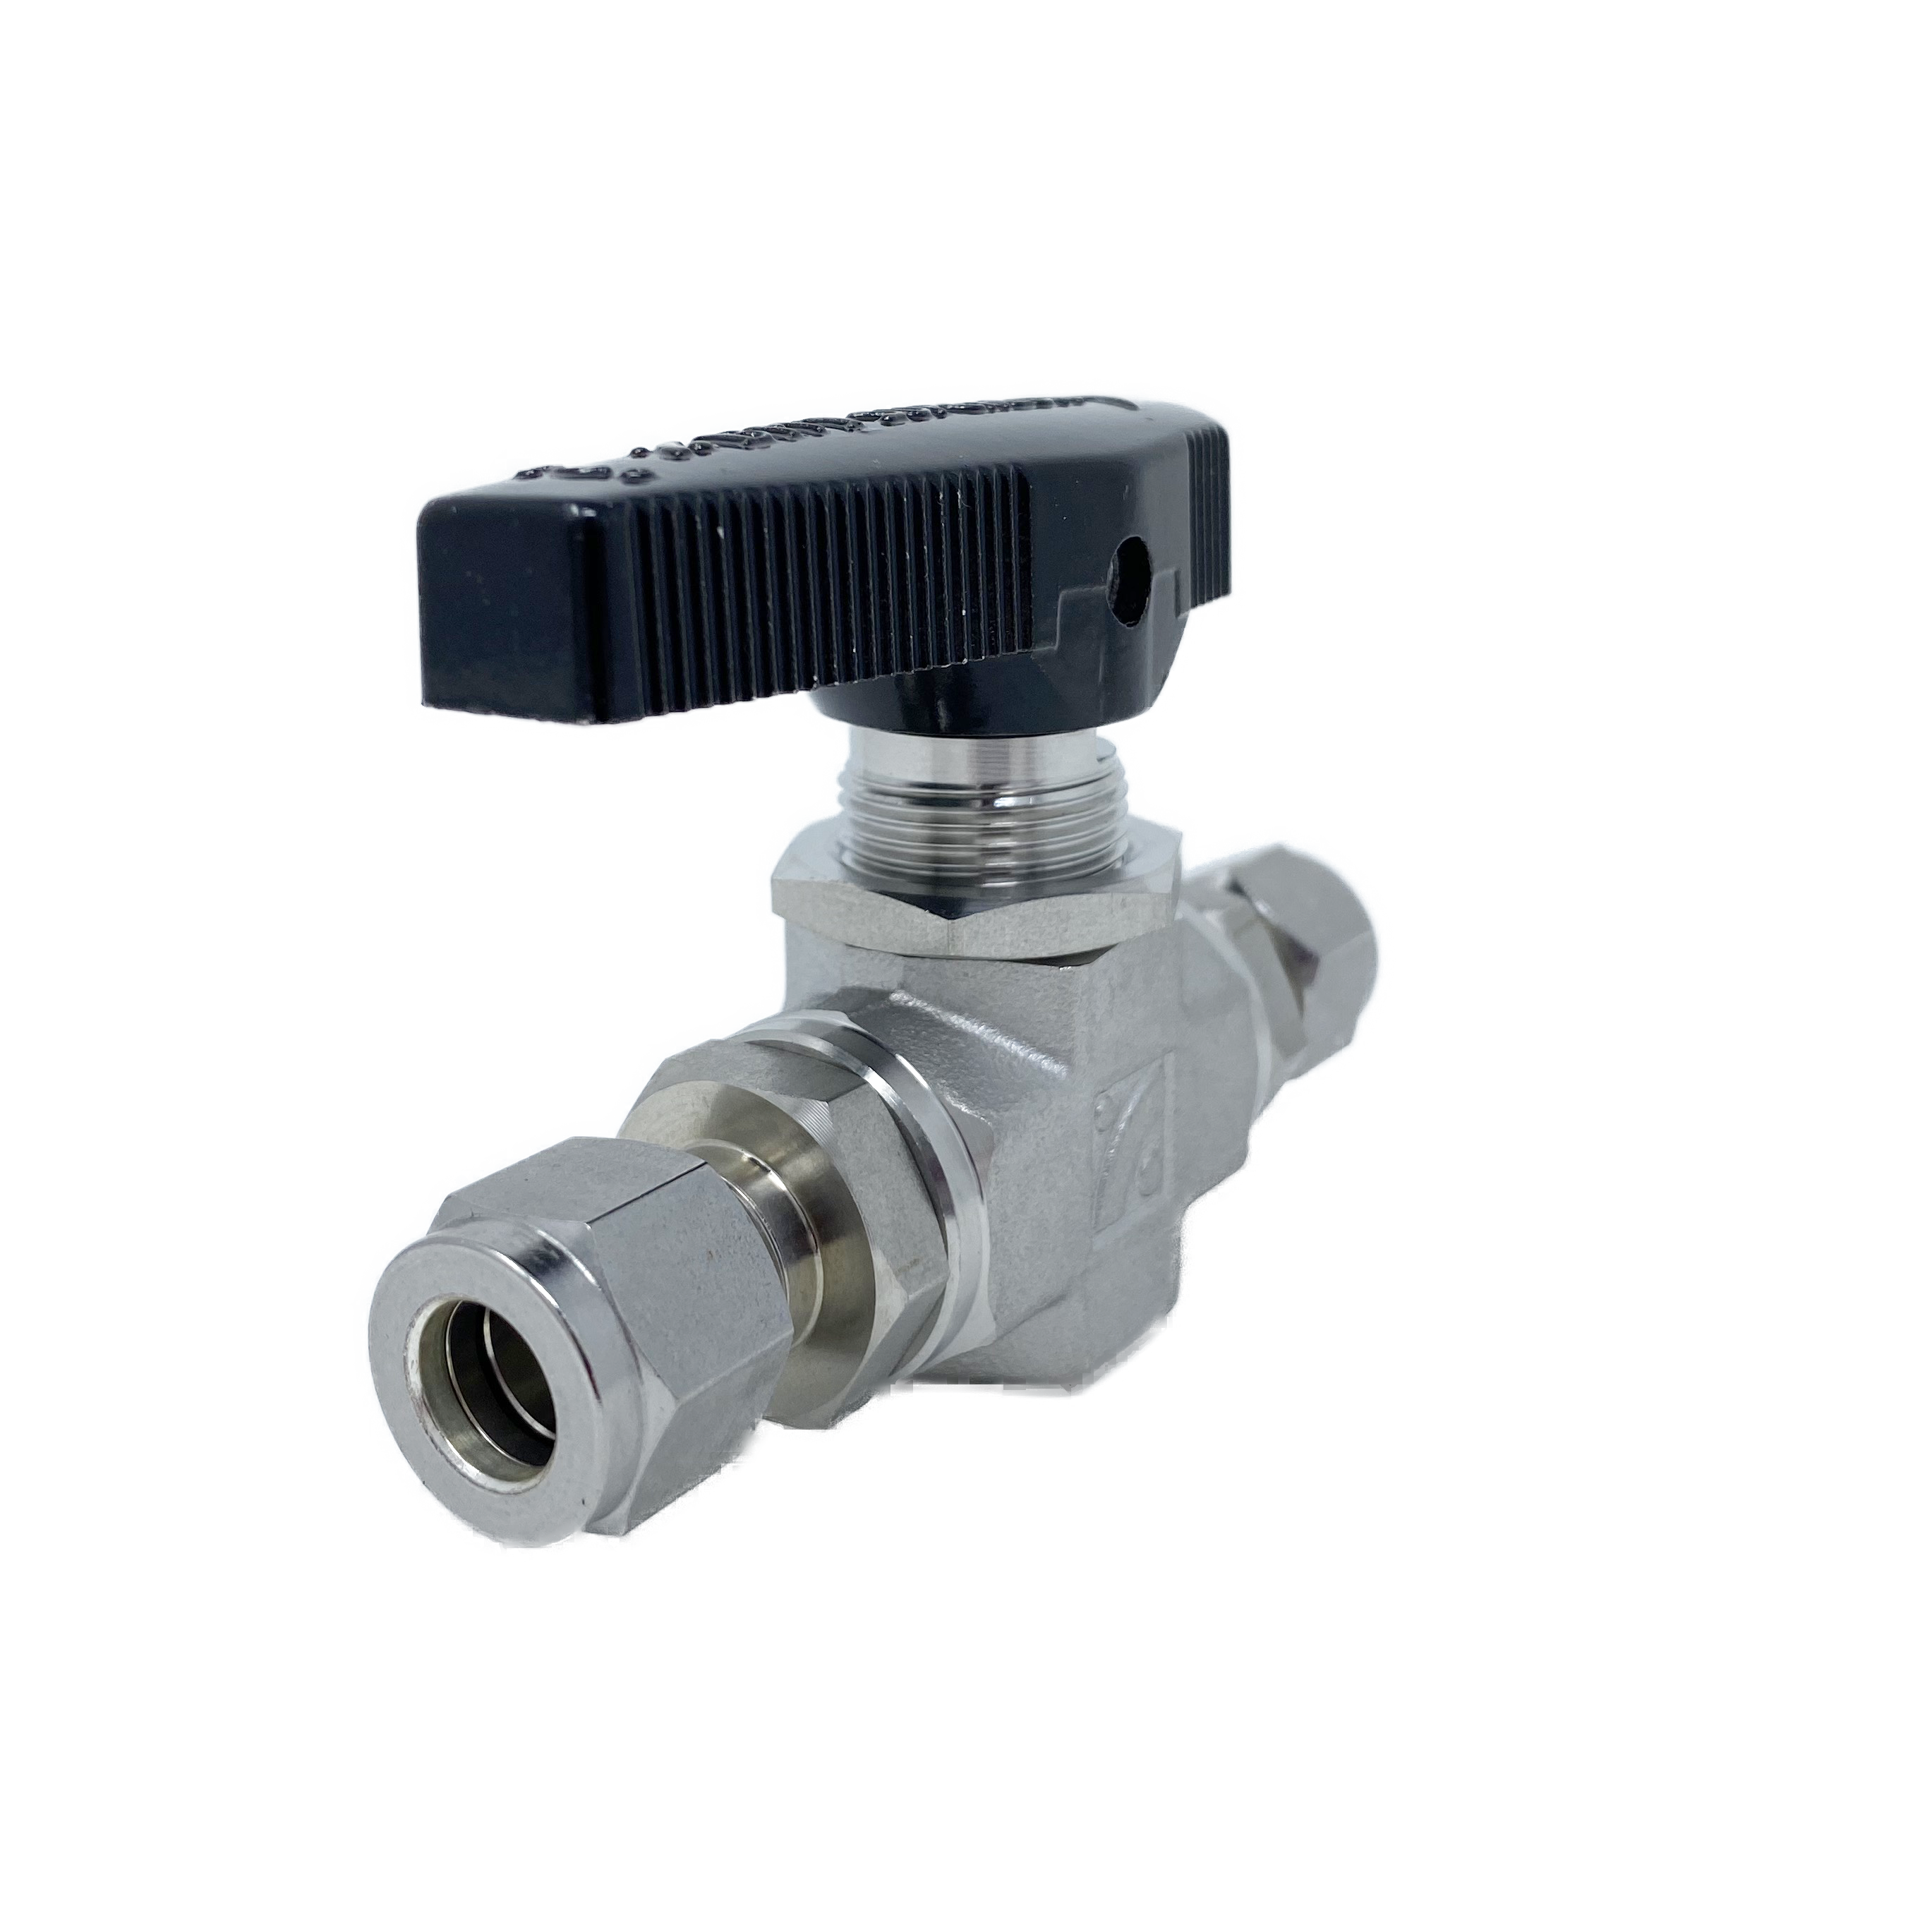 SBVF3602-S-6-MR : Superlok Ball Valve, Forged High Pressure, 3/8" Tube O.D, NACE Rated, 6000psi, 316SS